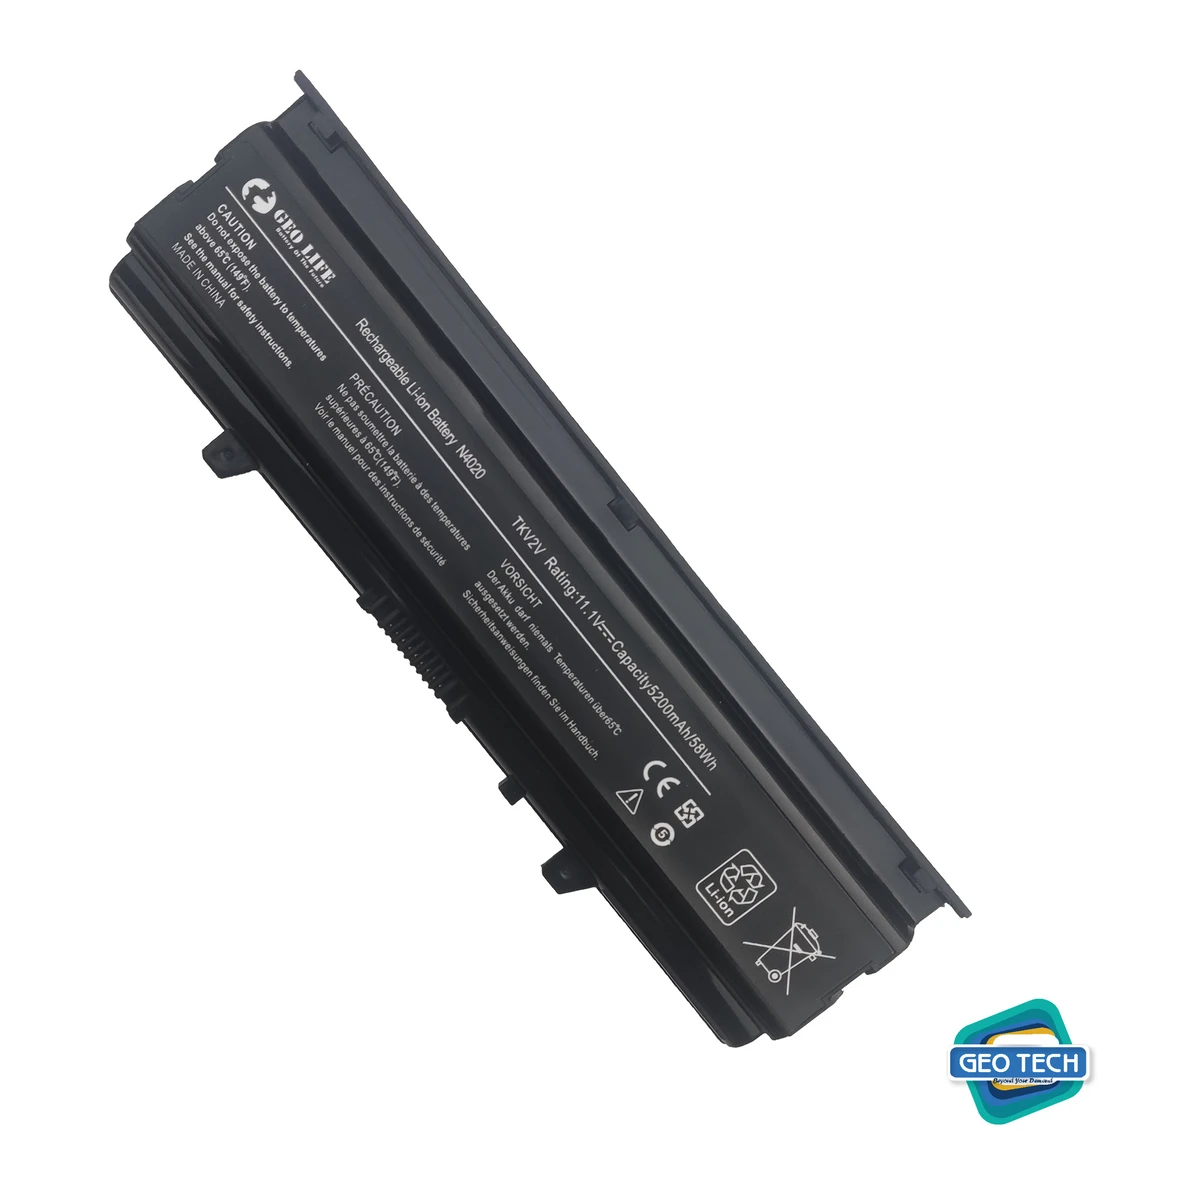 Laptop Battery For Dell 4030/4020